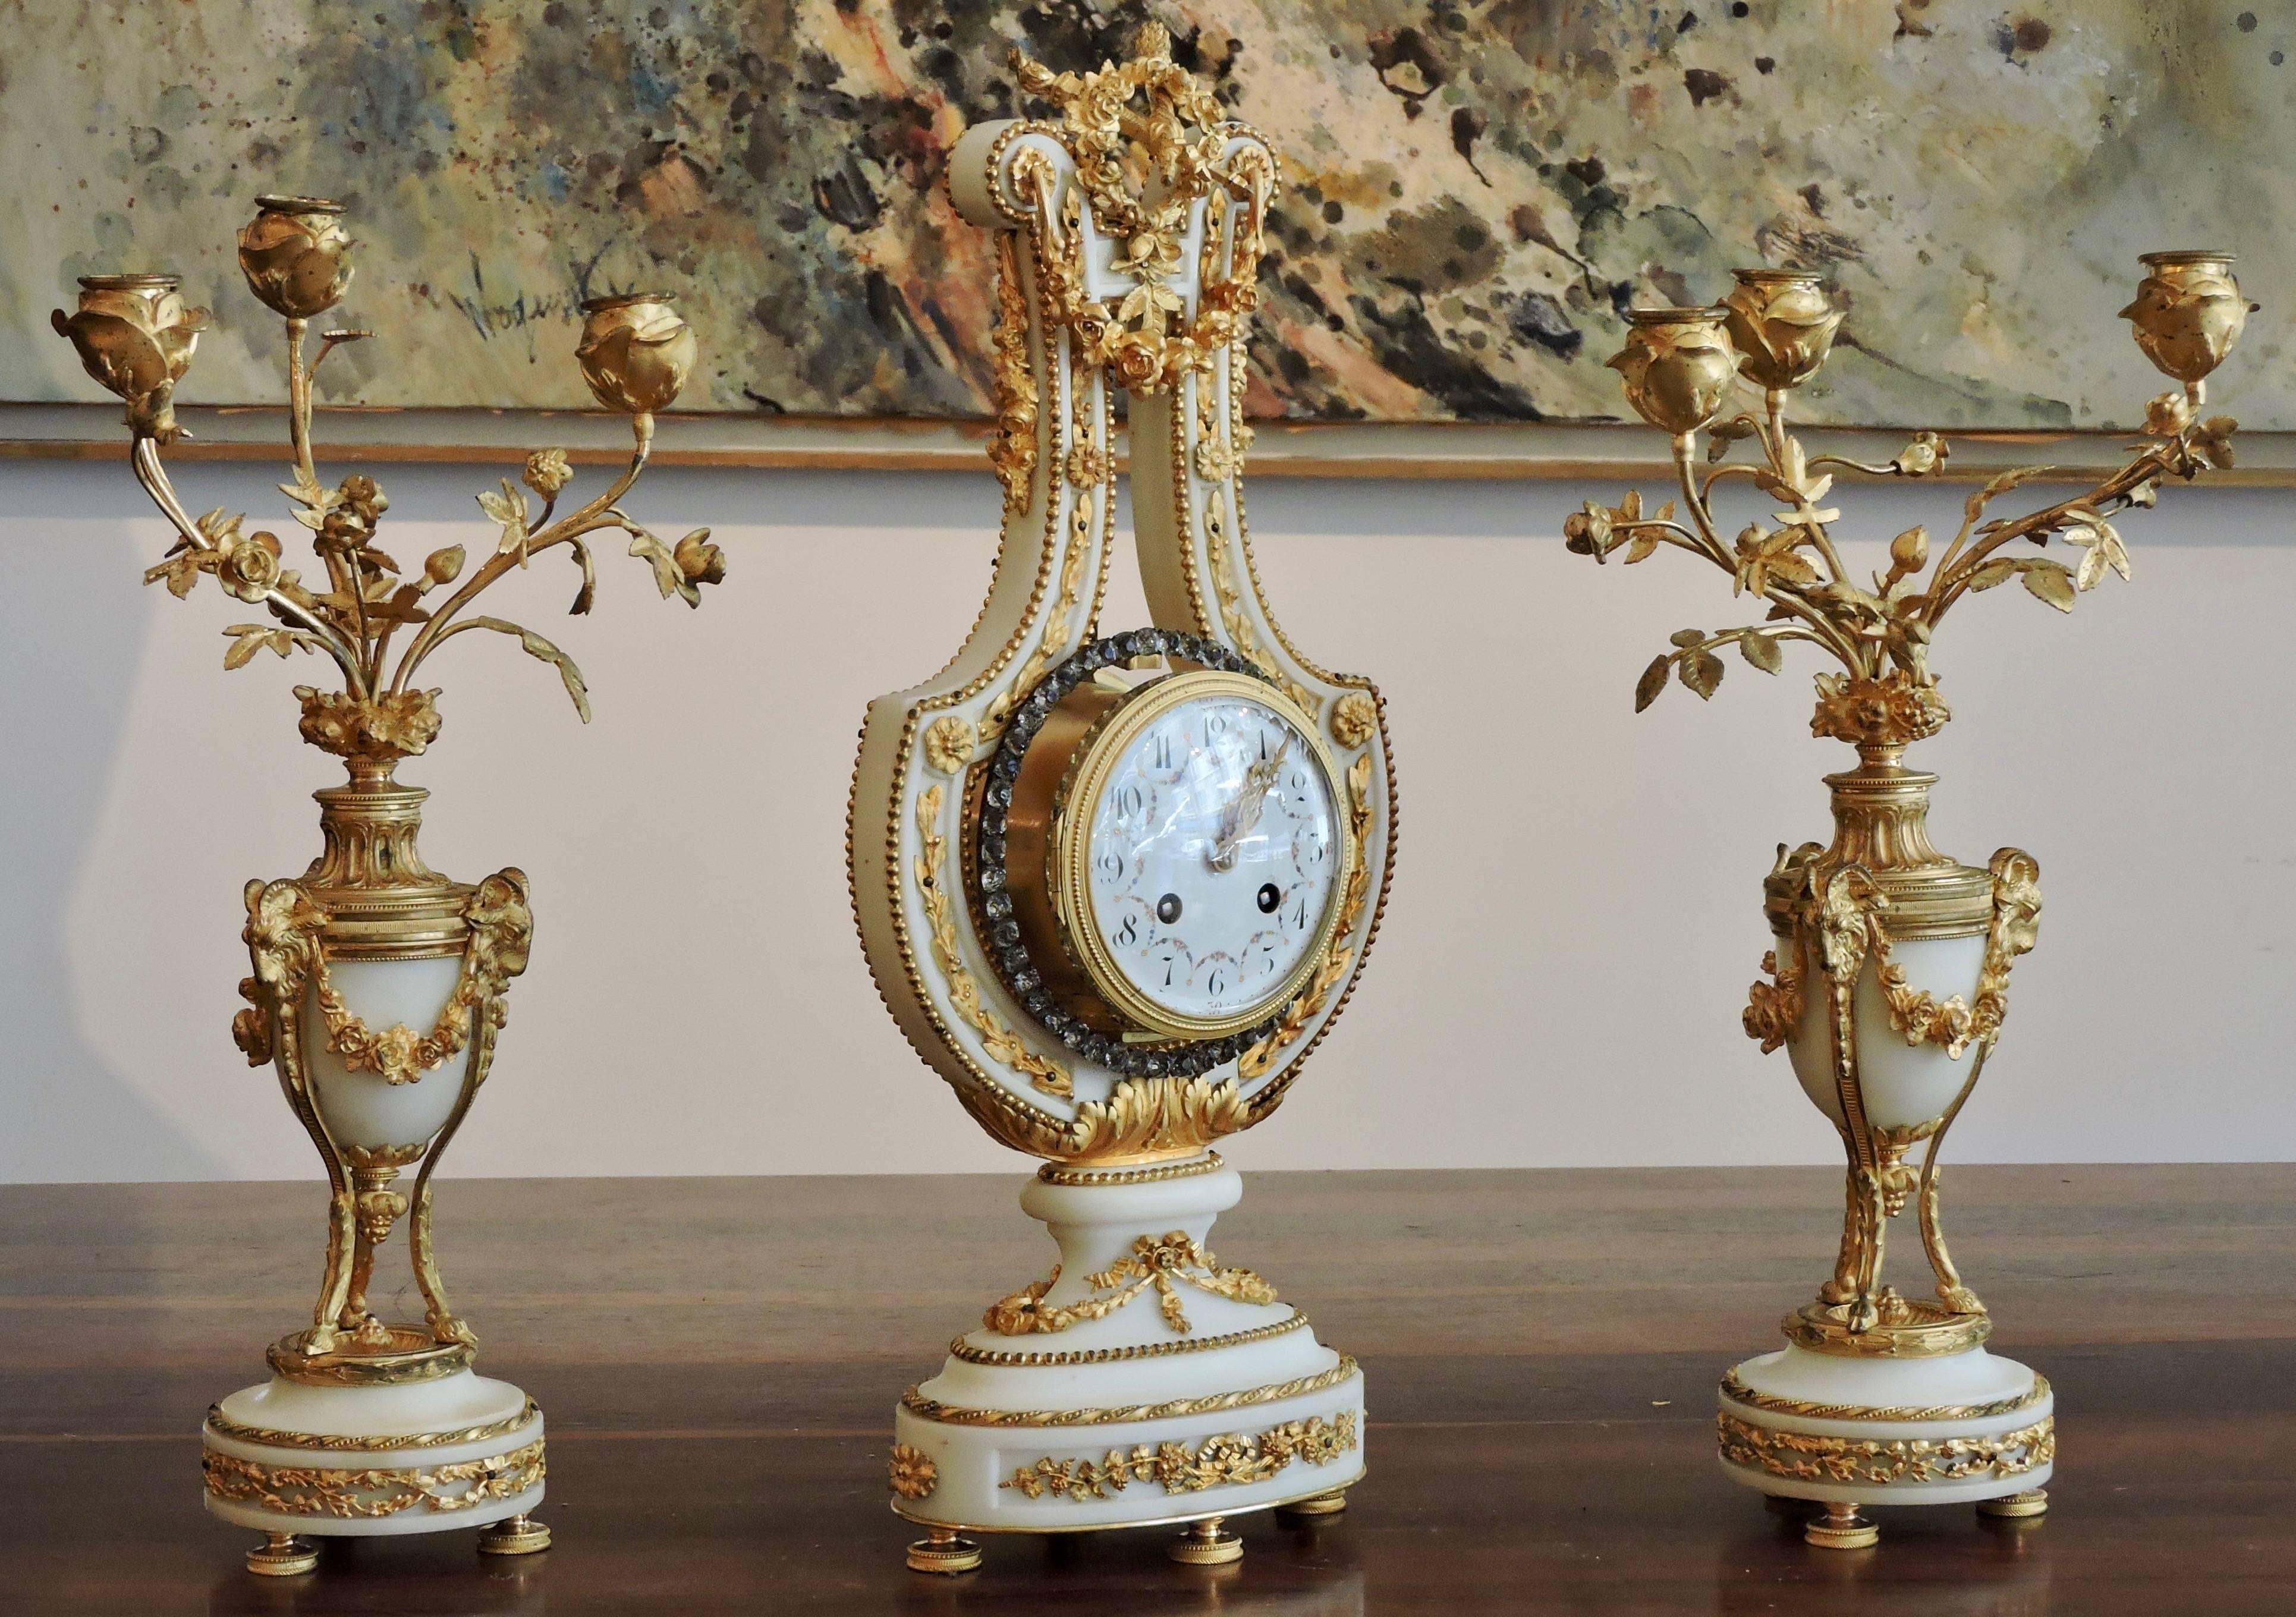 A 19th century French Ormolu and White Marble Three-Piece Lyre Clock Garniture
The central clock is shaped from white marble as a lyre, and mounted all over with gilt bronze leaves and swags, and jewellered torsades.
The pair of flanking candelabra